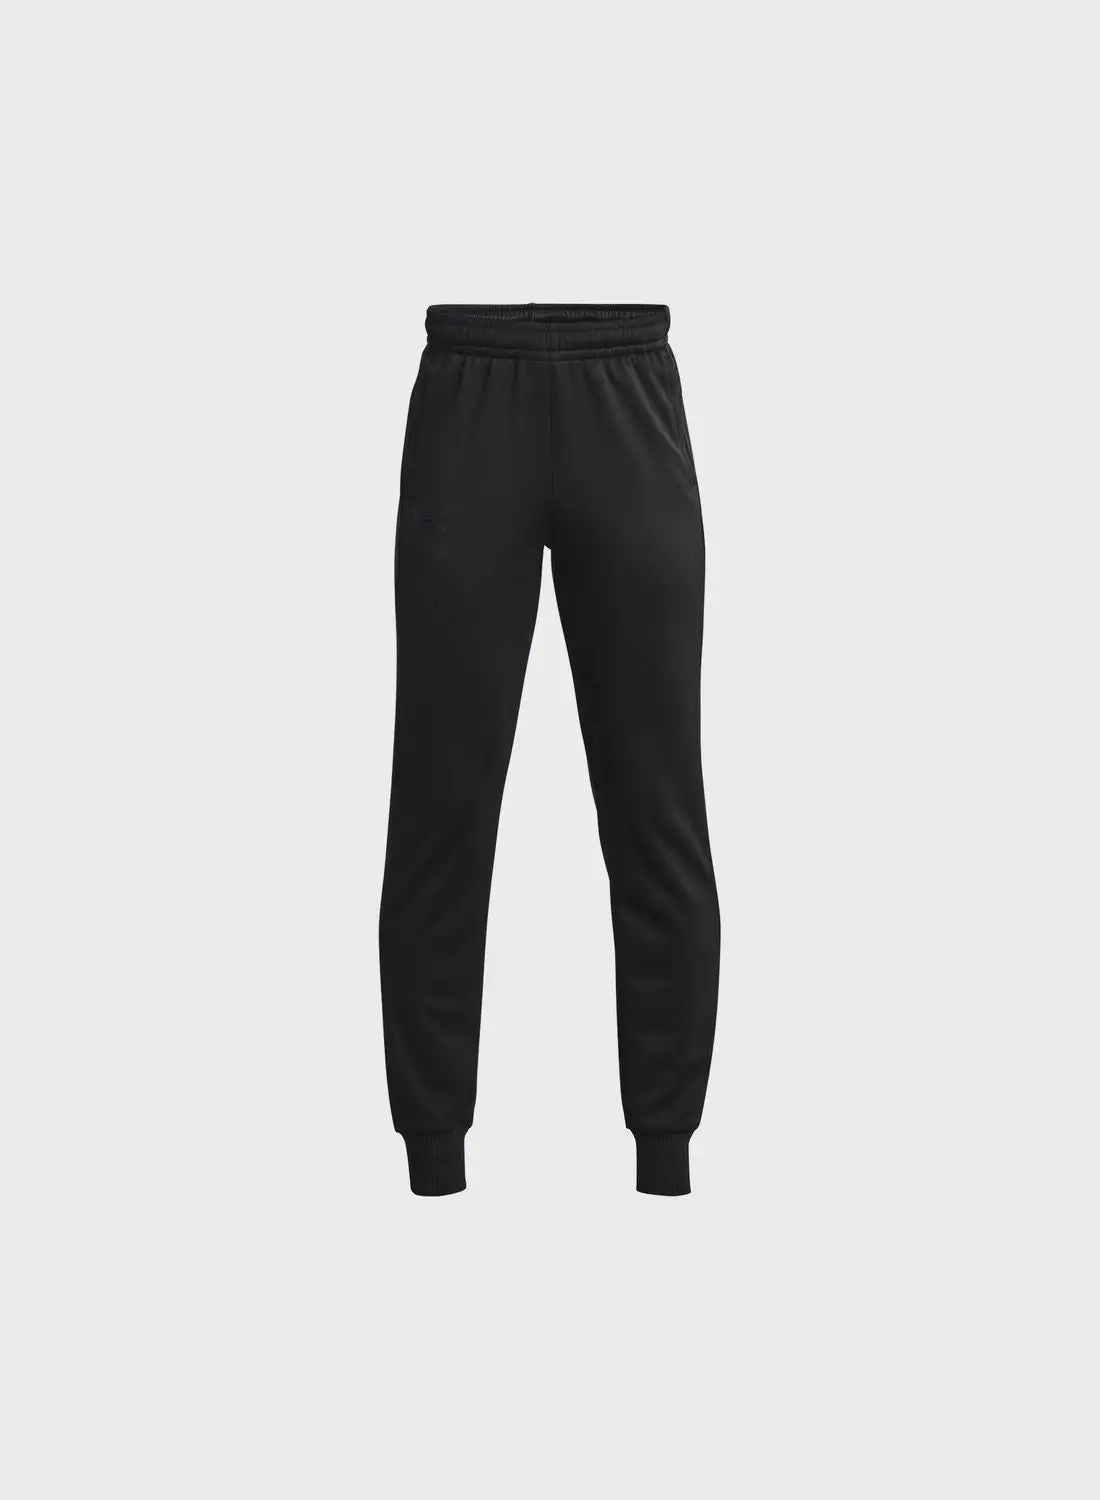 UNDER ARMOUR Youth Fleece Joggers